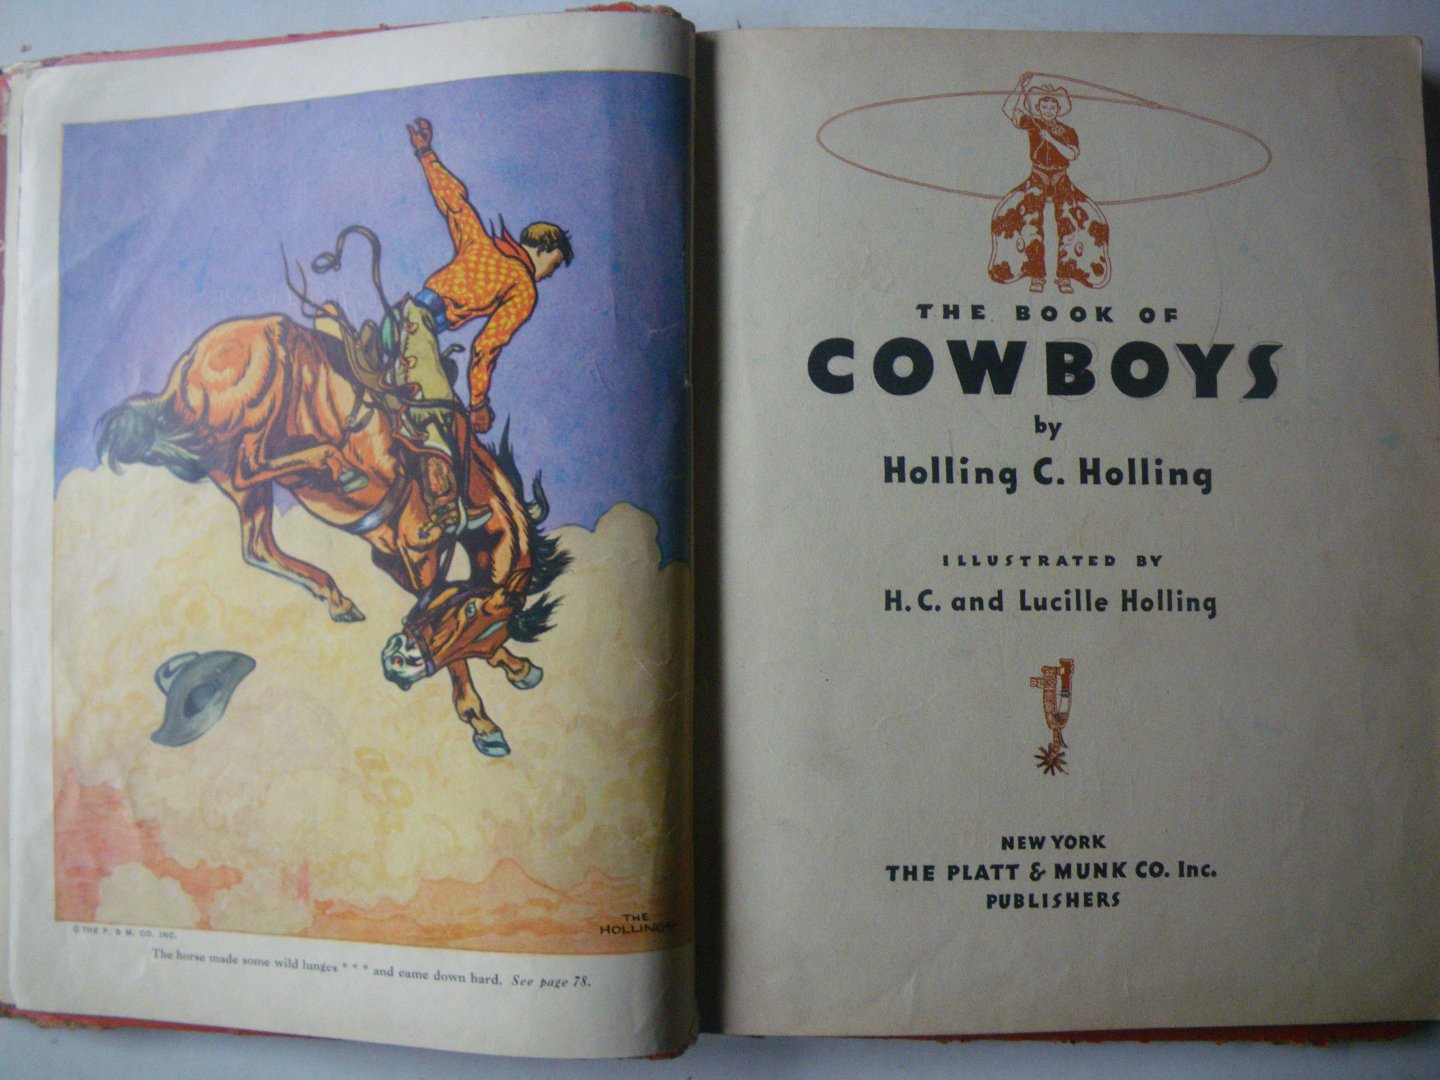 Holling, Holling C. - The book of cowboys